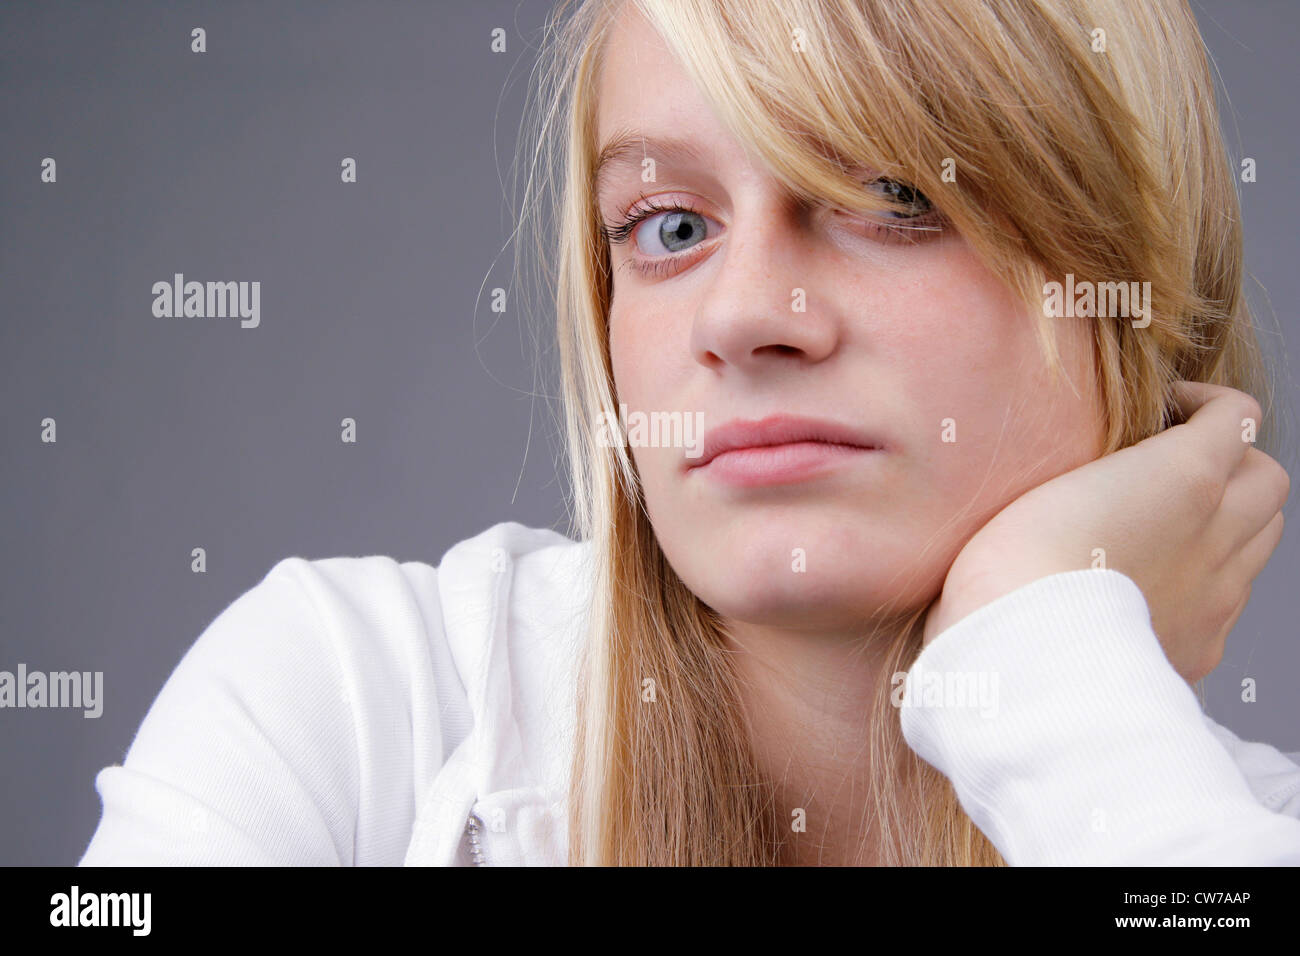 portrait of a young blond woman, Germany Stock Photo